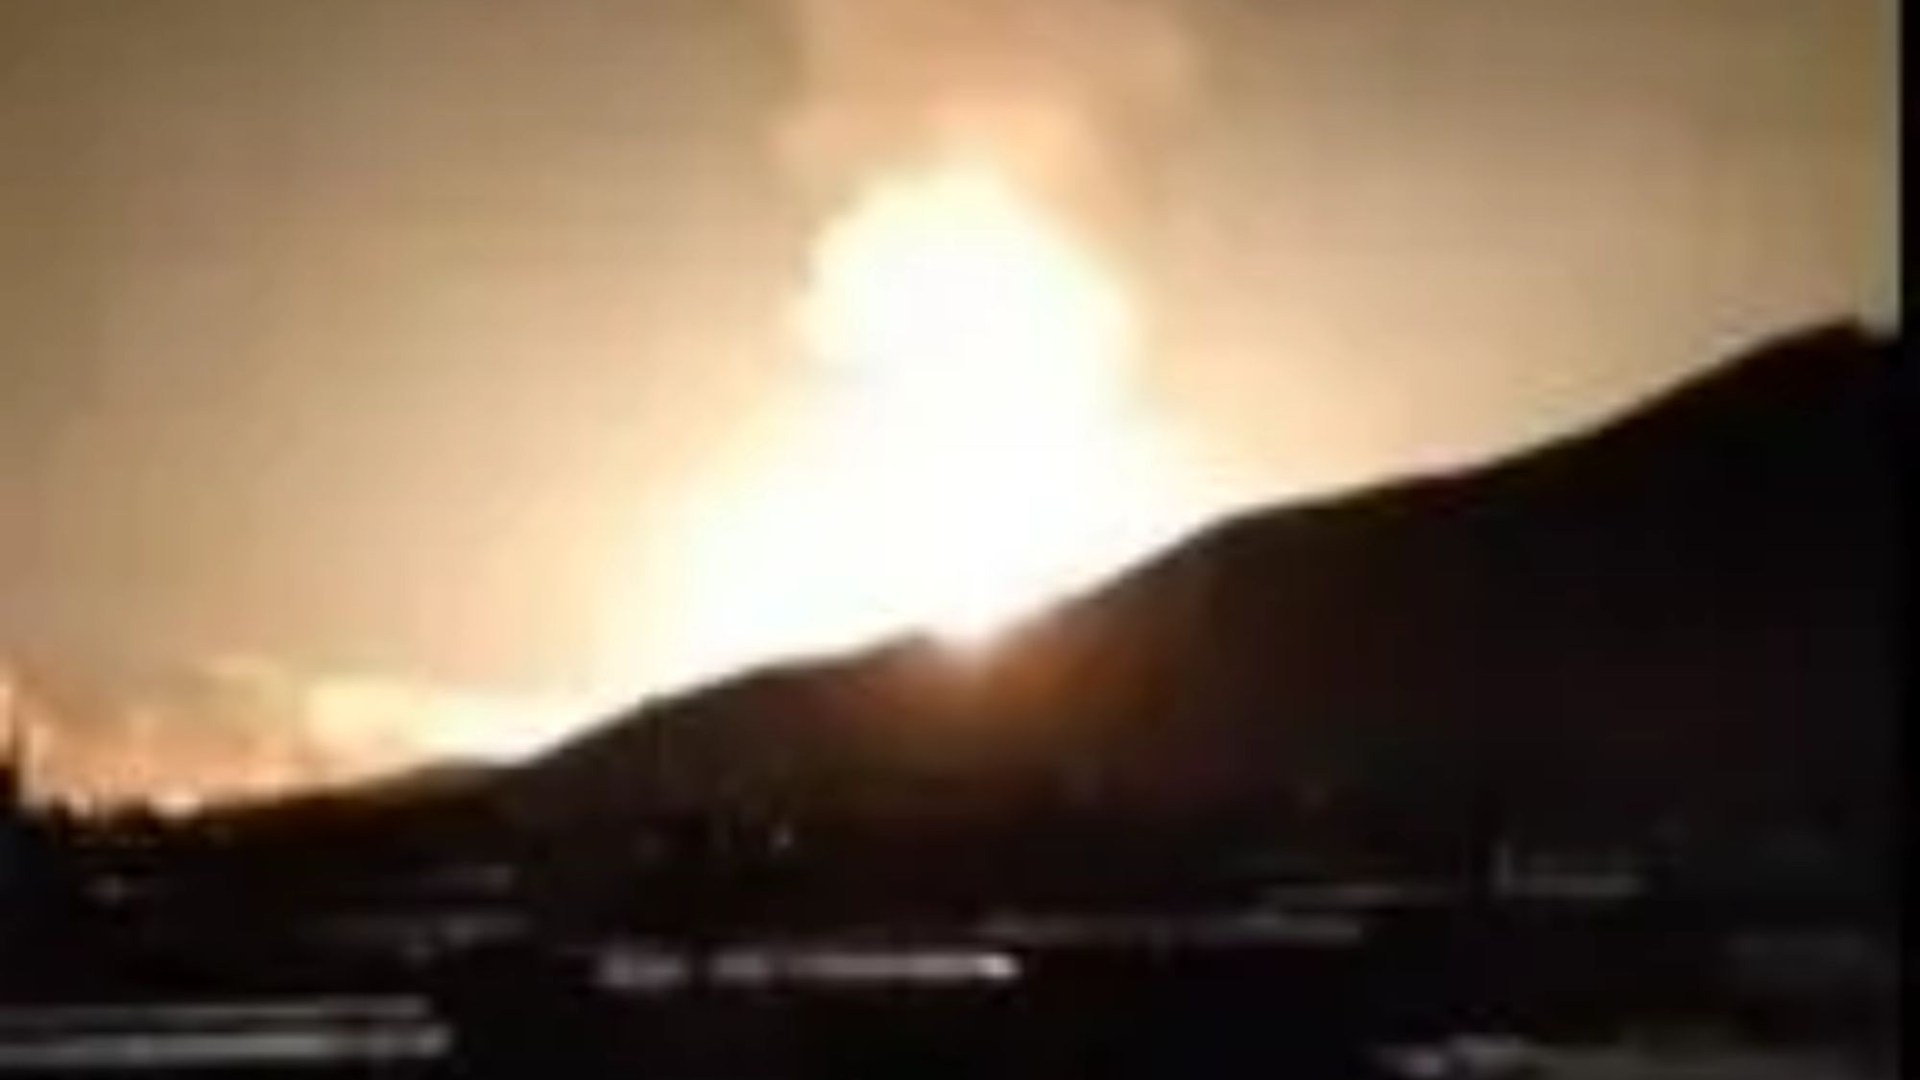 Moment Iran gas pipeline is BLOWN UP in huge sabotage attack sending flames towering into night sky amid WW3 tensions [Video]